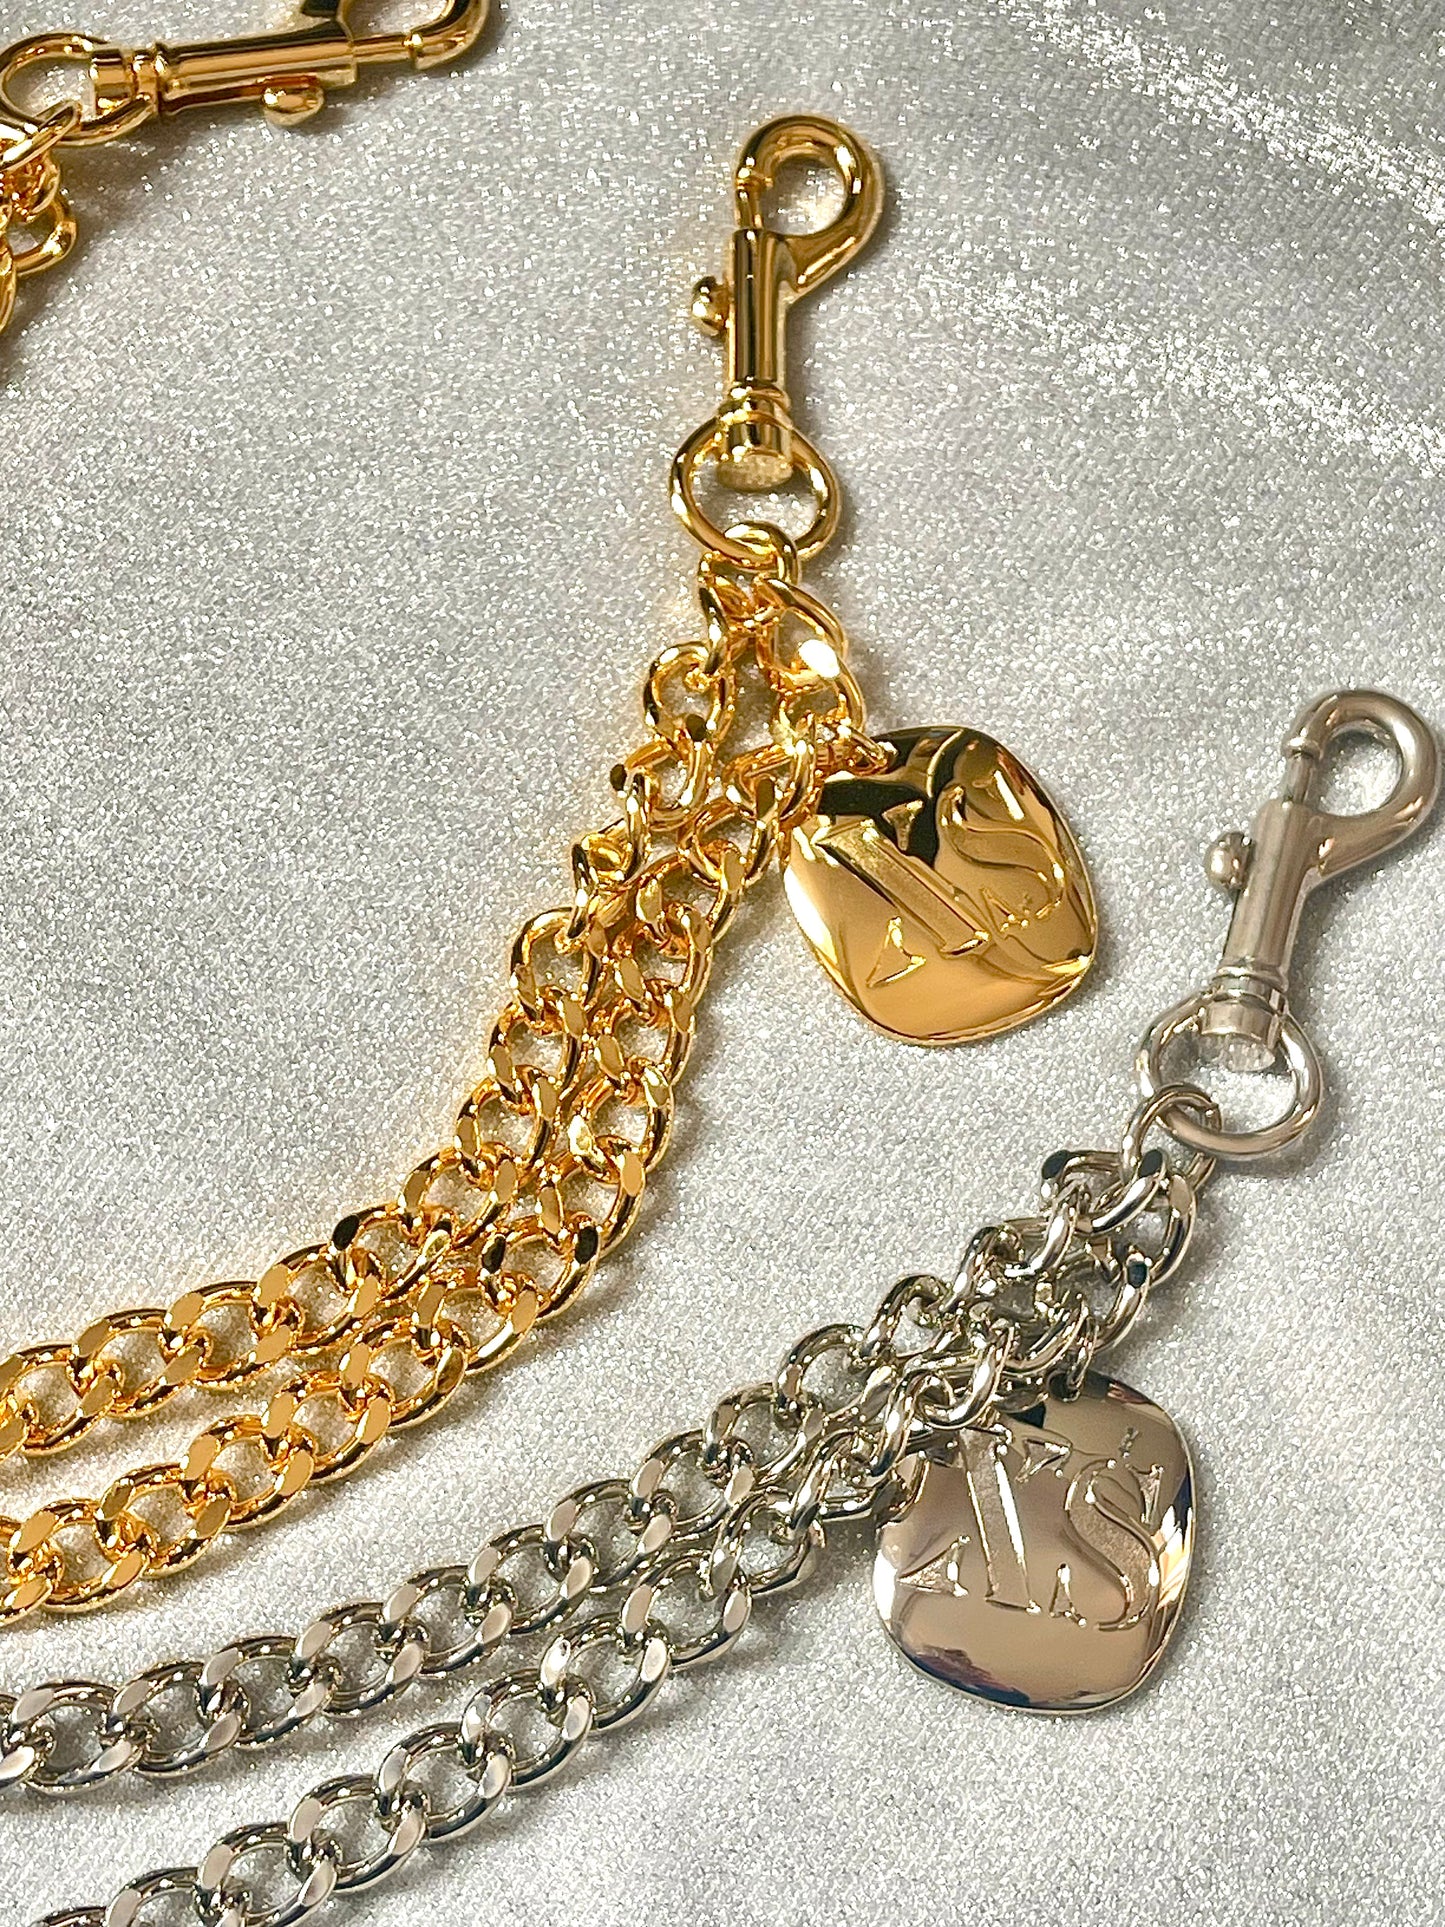 Refurbished With 18K yellow Gold Paco Rabanne Black XS Chain Necklace